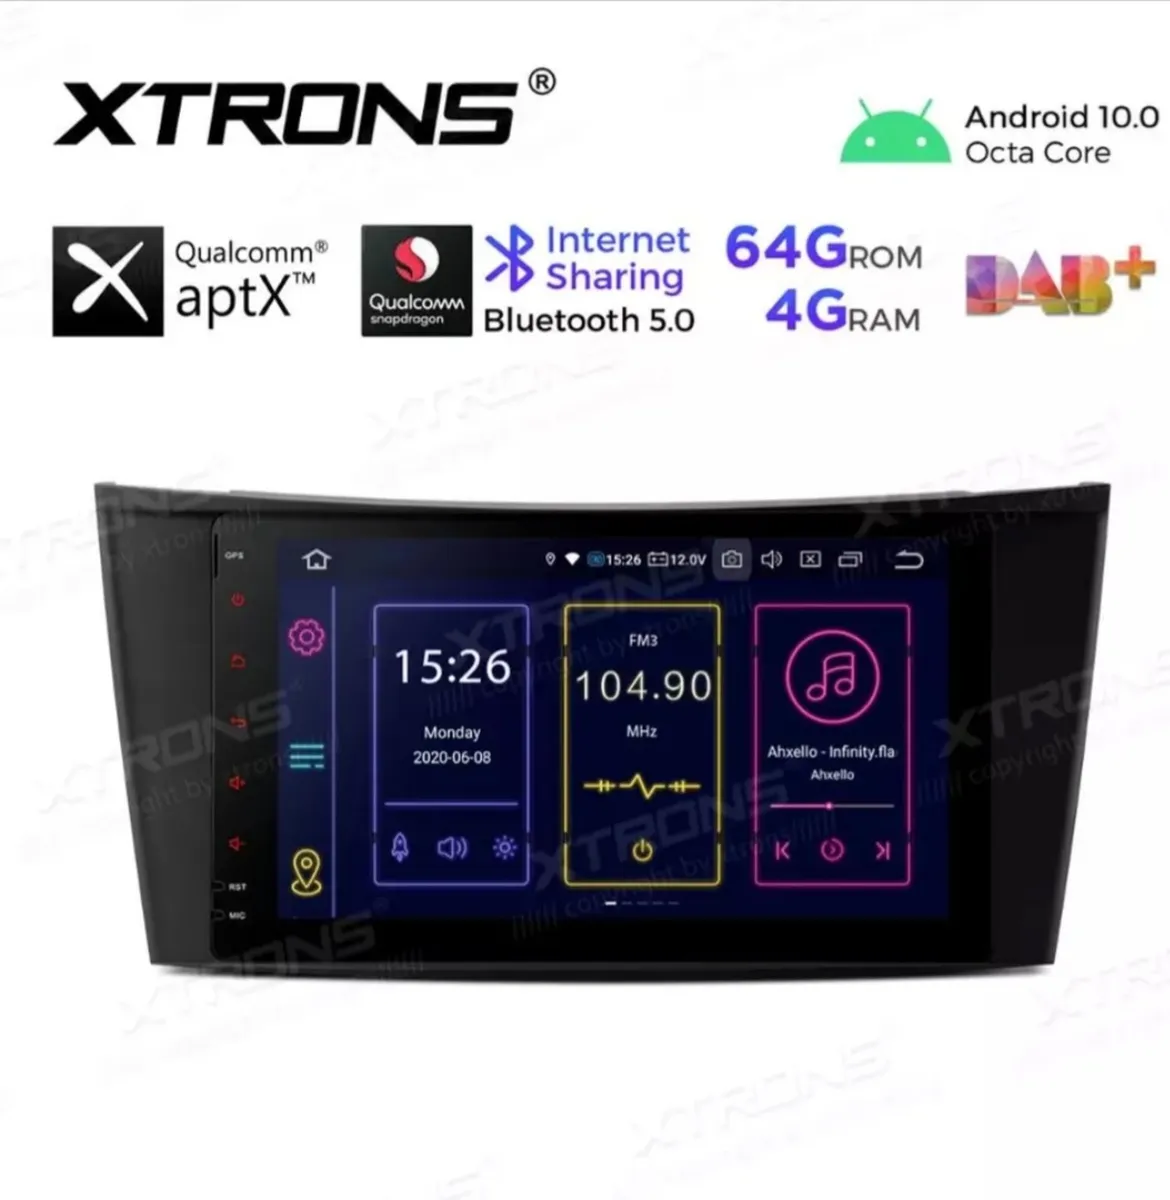 Xtron android car radio & accessories